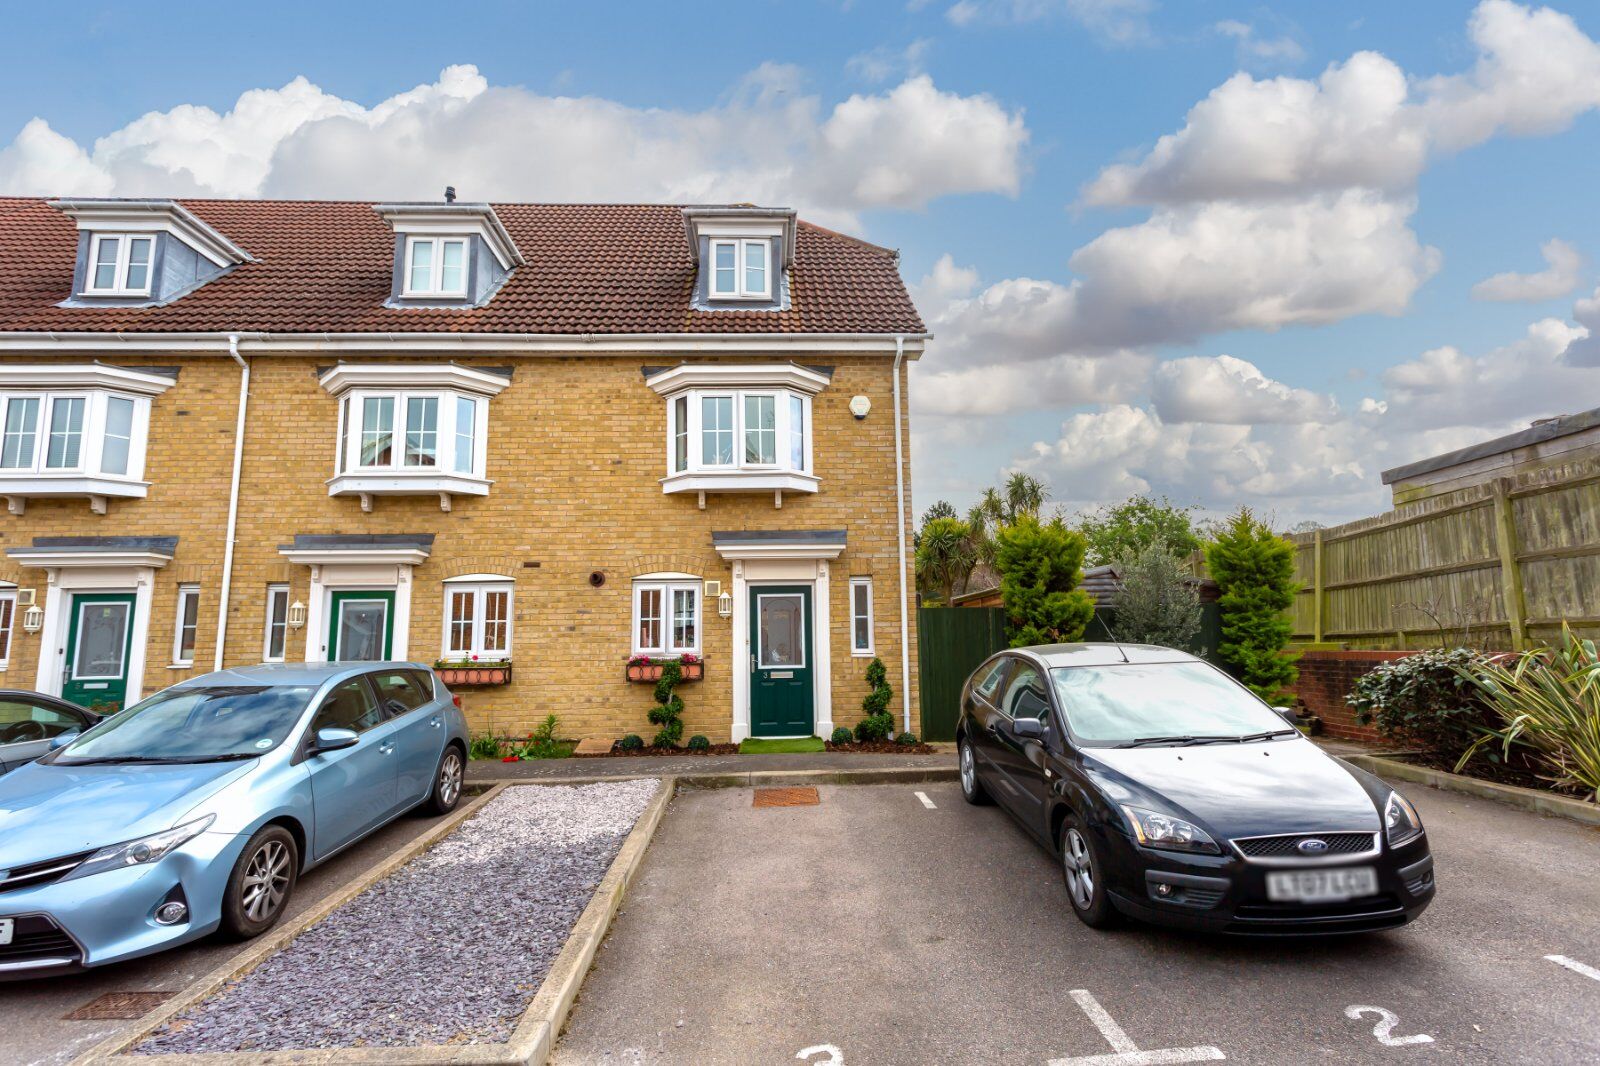 3 bedroom end terraced house for sale Shaw Court, Malmesbury Road, SM4, main image